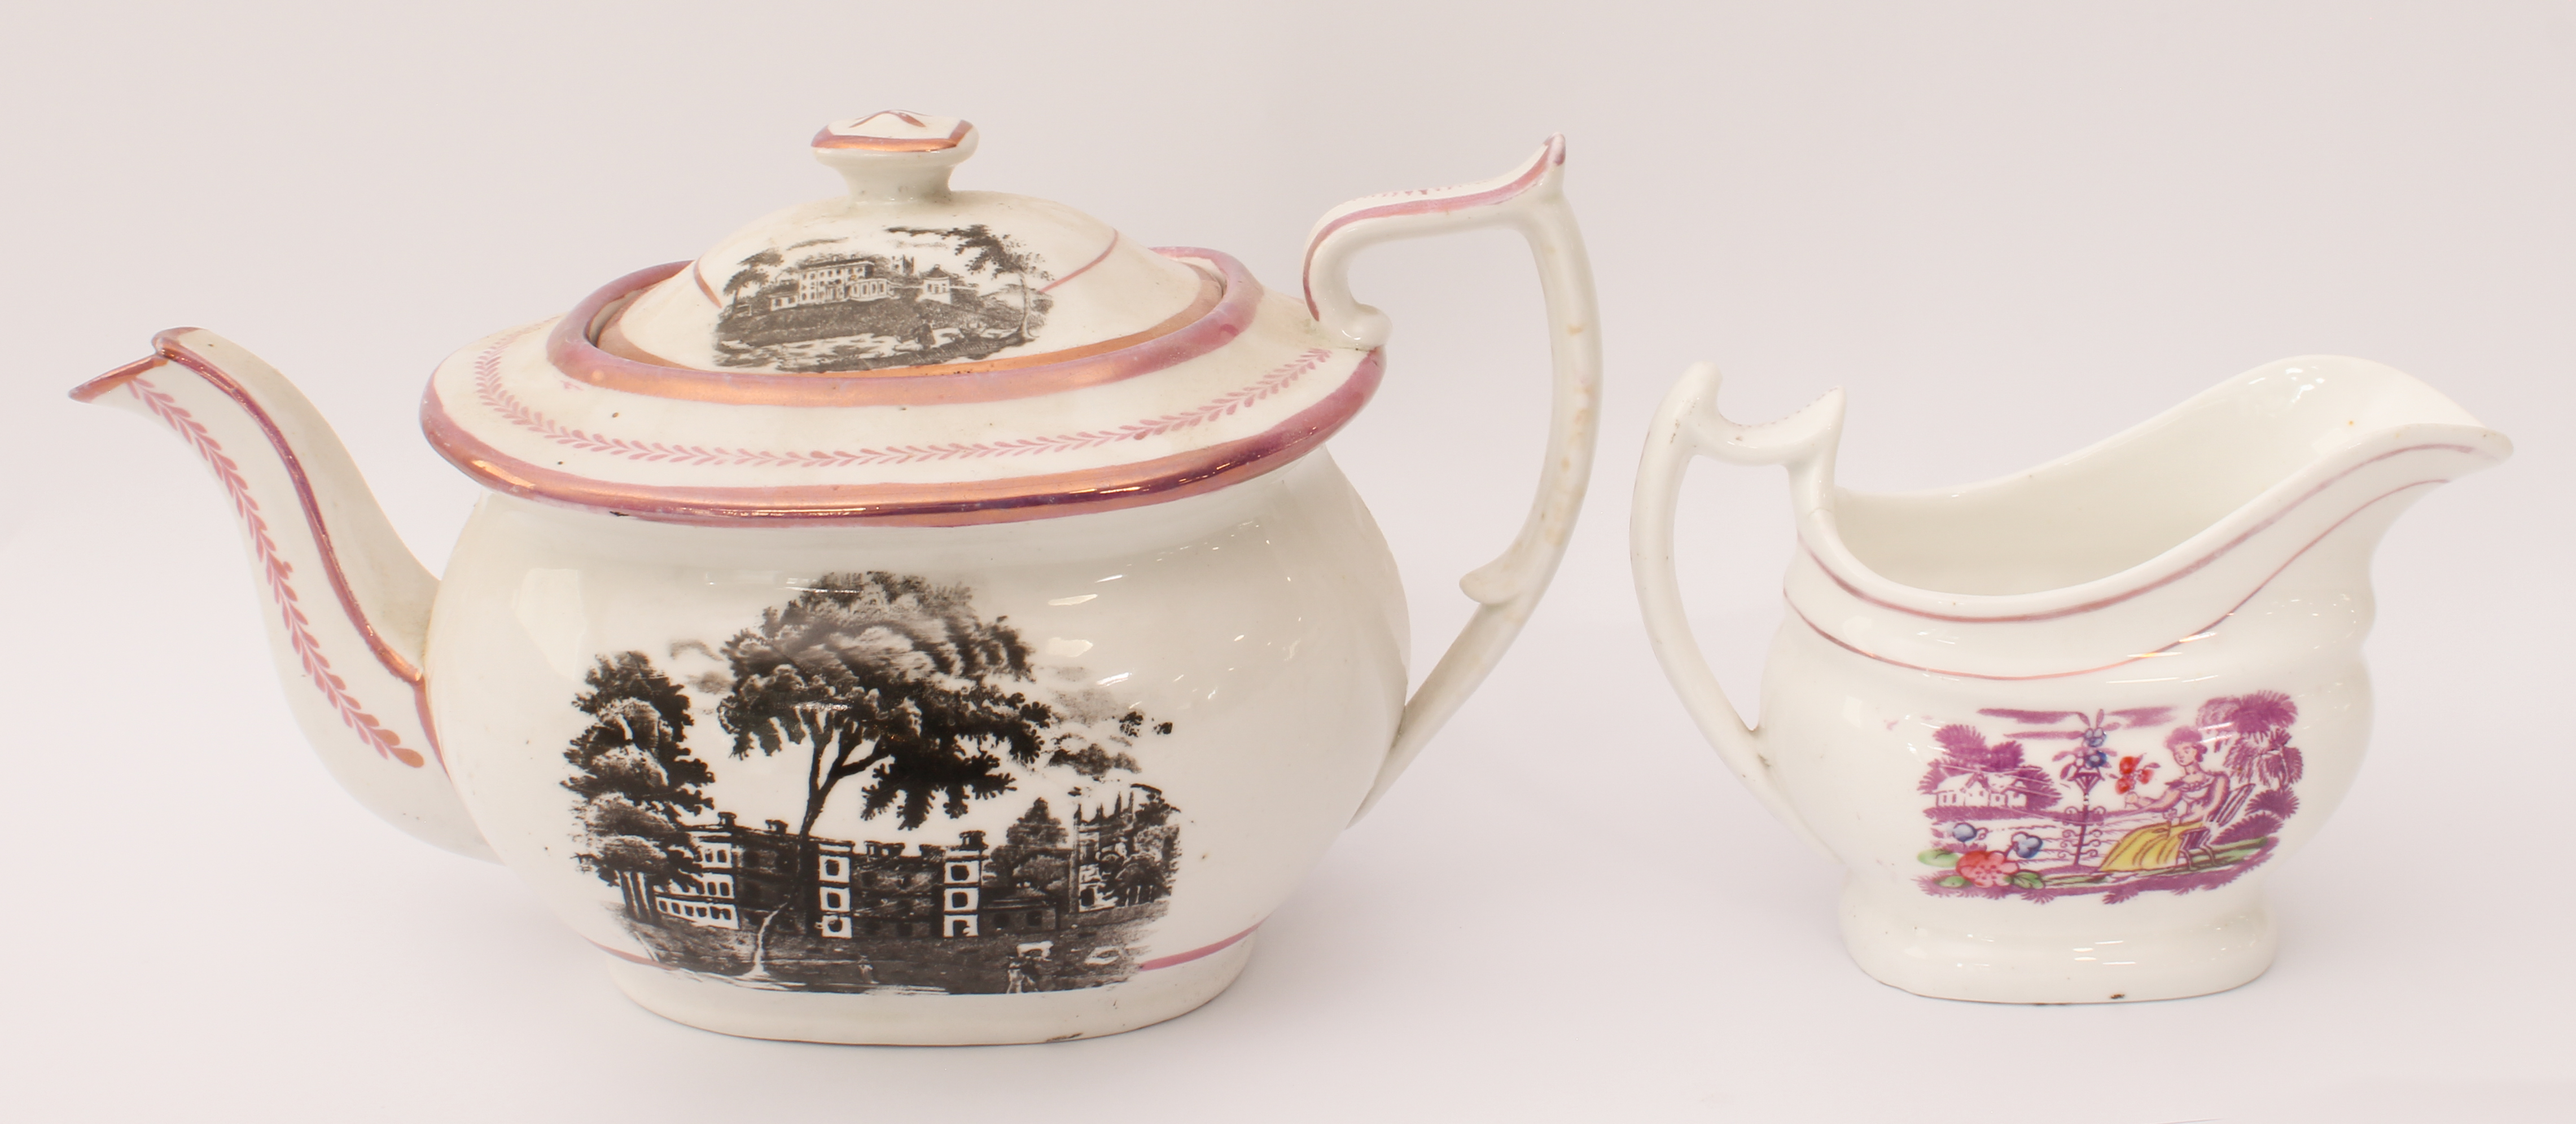 A 19th century silver-shaped Sunderland lustreware teapot - transfer decorated with figures in the